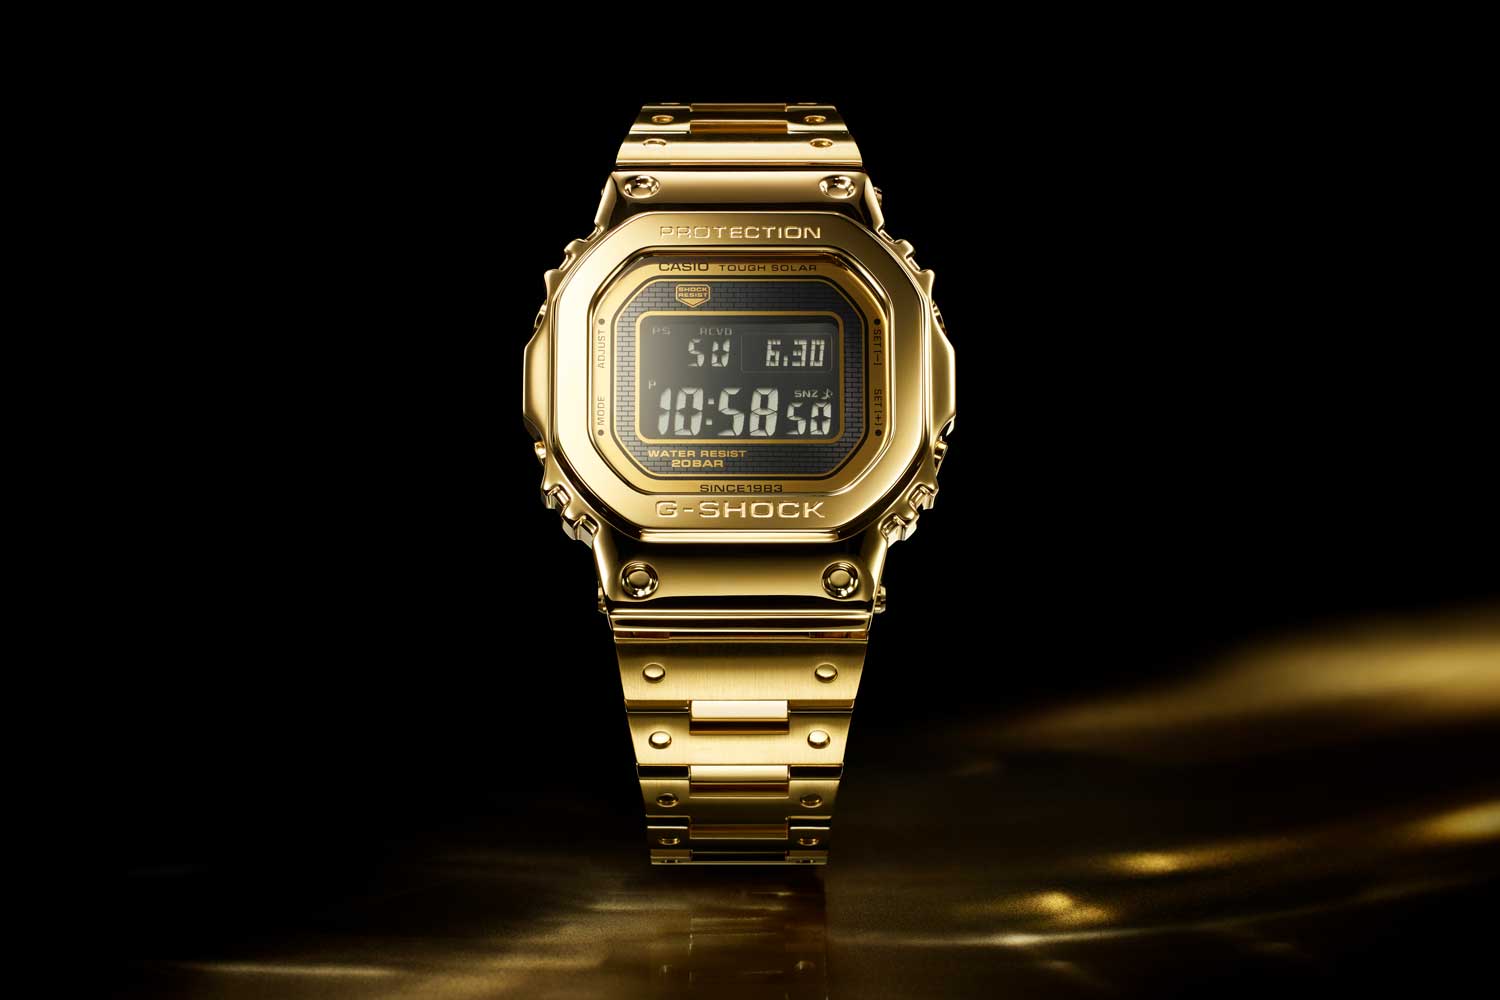 The G-D5000-9JR featured a case, bracelet, pushers, and even its screws, in 18K gold